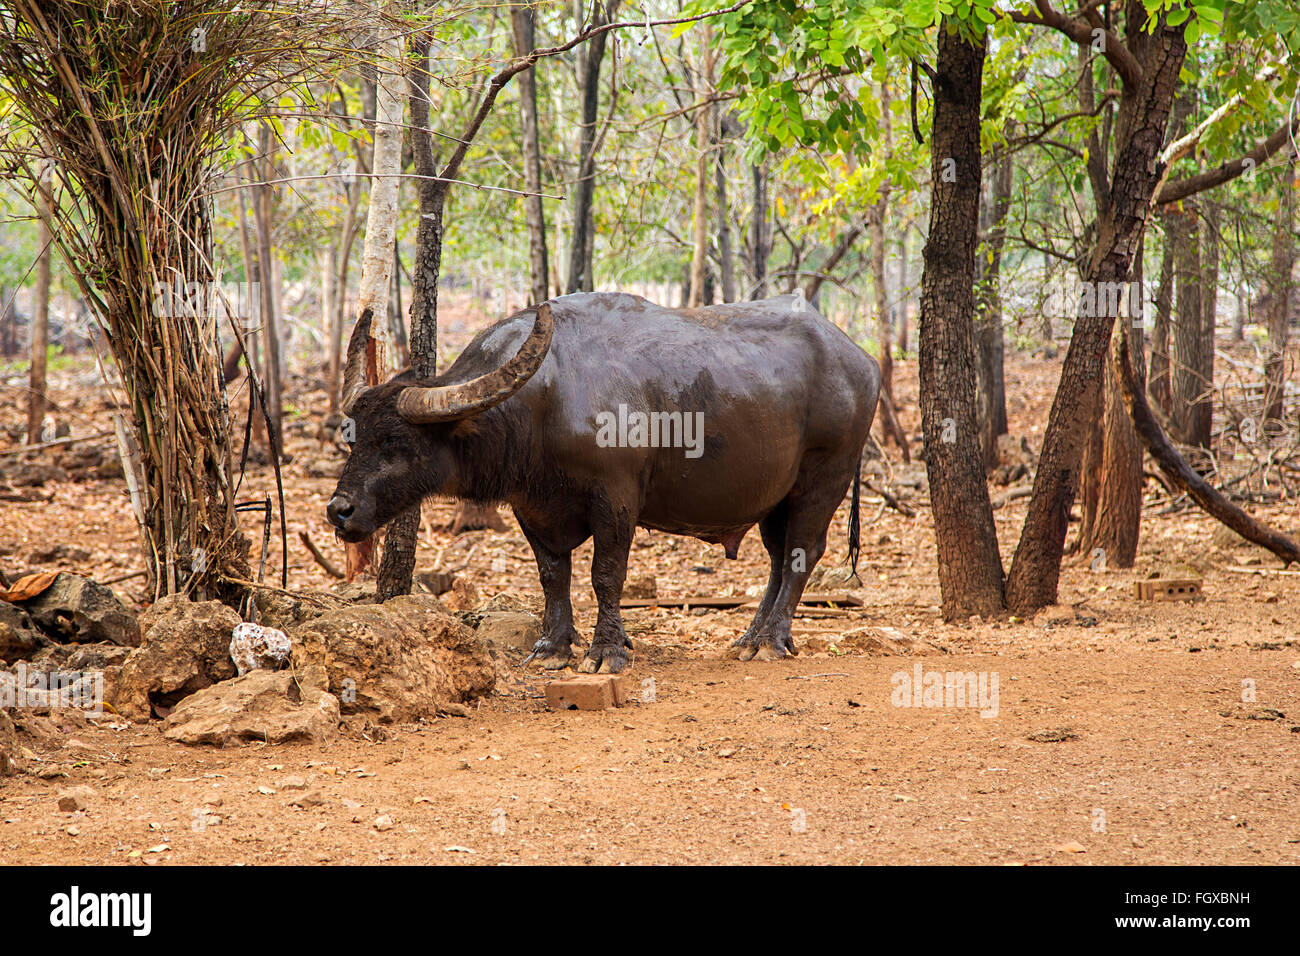 Water buffalo in the Thailand forest Stock Photo